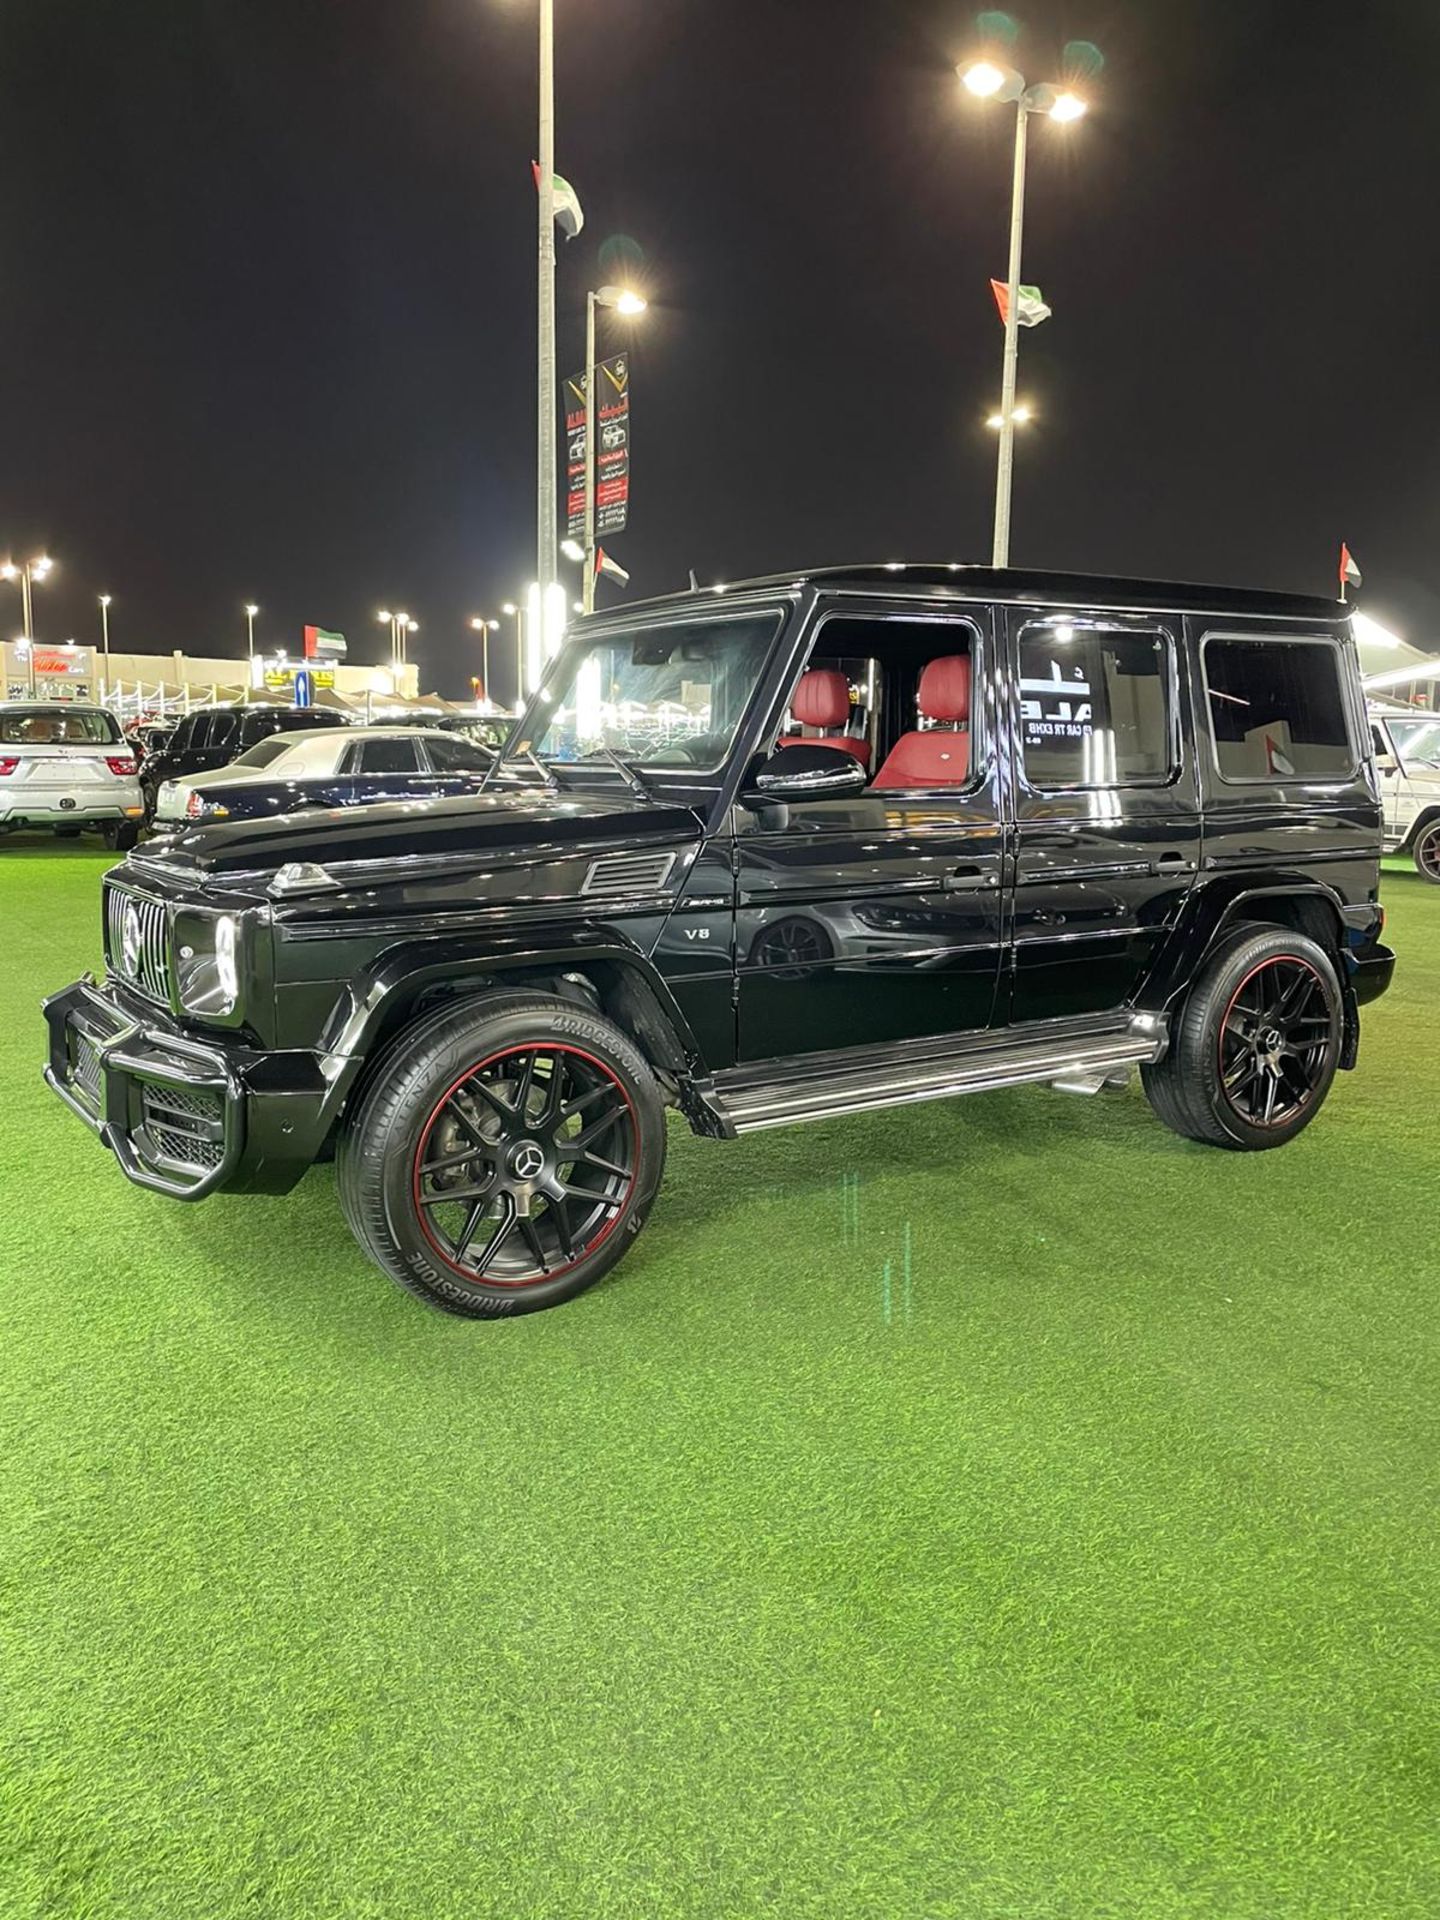 2011 MERCEDES G WAGON G55 changed to a 2020 G63 look Full outside exterior complete package !! - Image 15 of 36